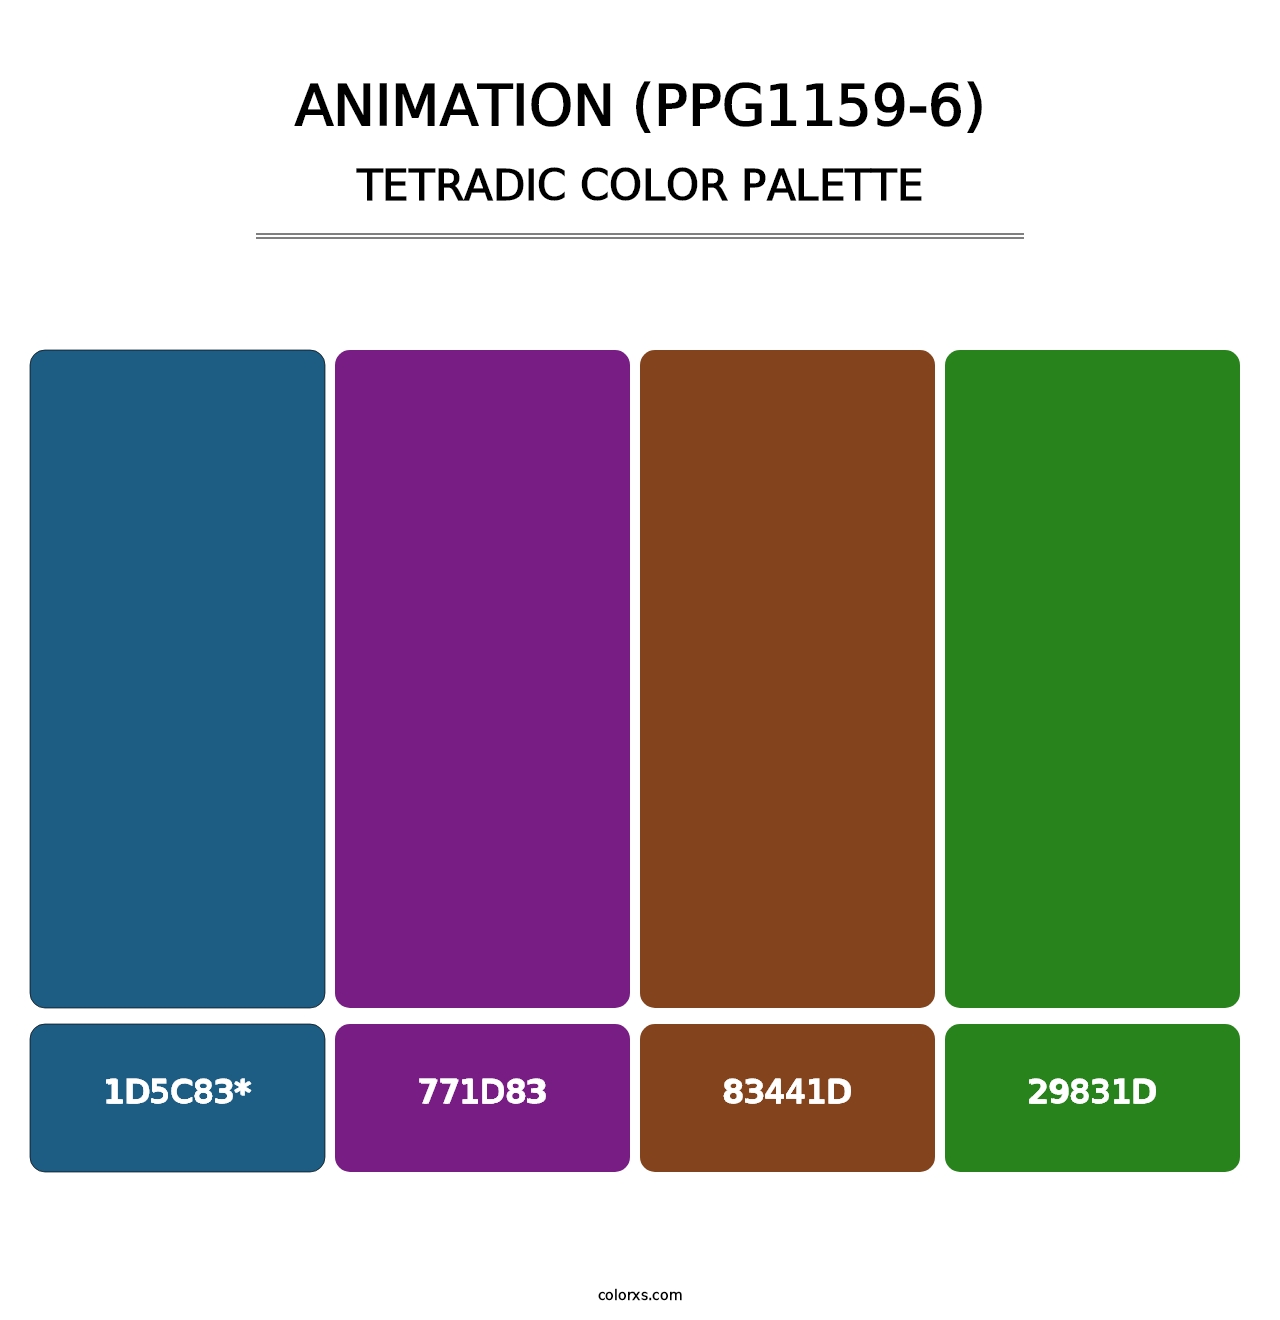 Animation (PPG1159-6) - Tetradic Color Palette